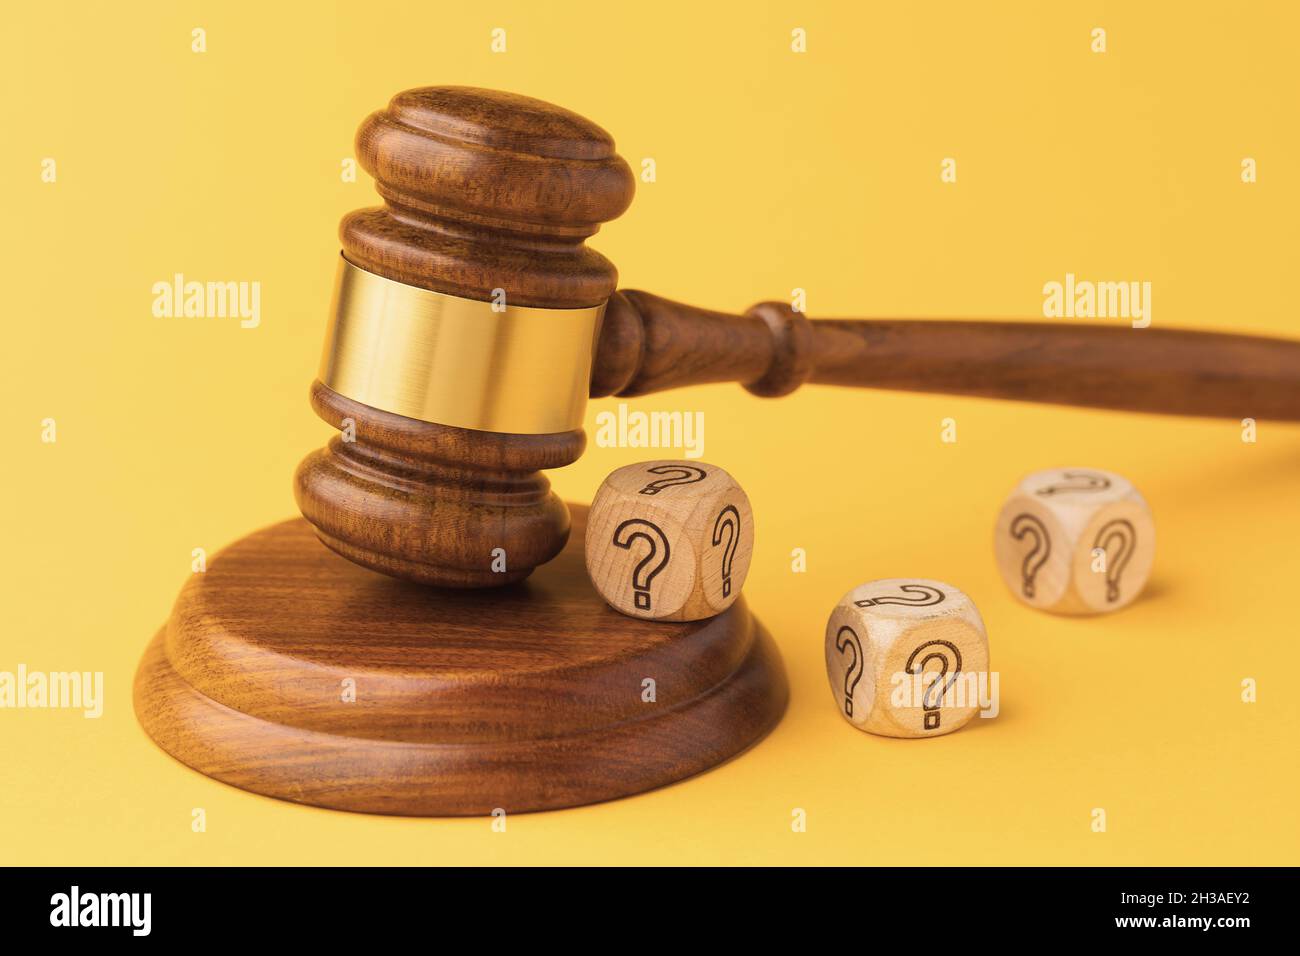 Judge gavel and wooden cubes with question mark, guilt or innocence concept Stock Photo